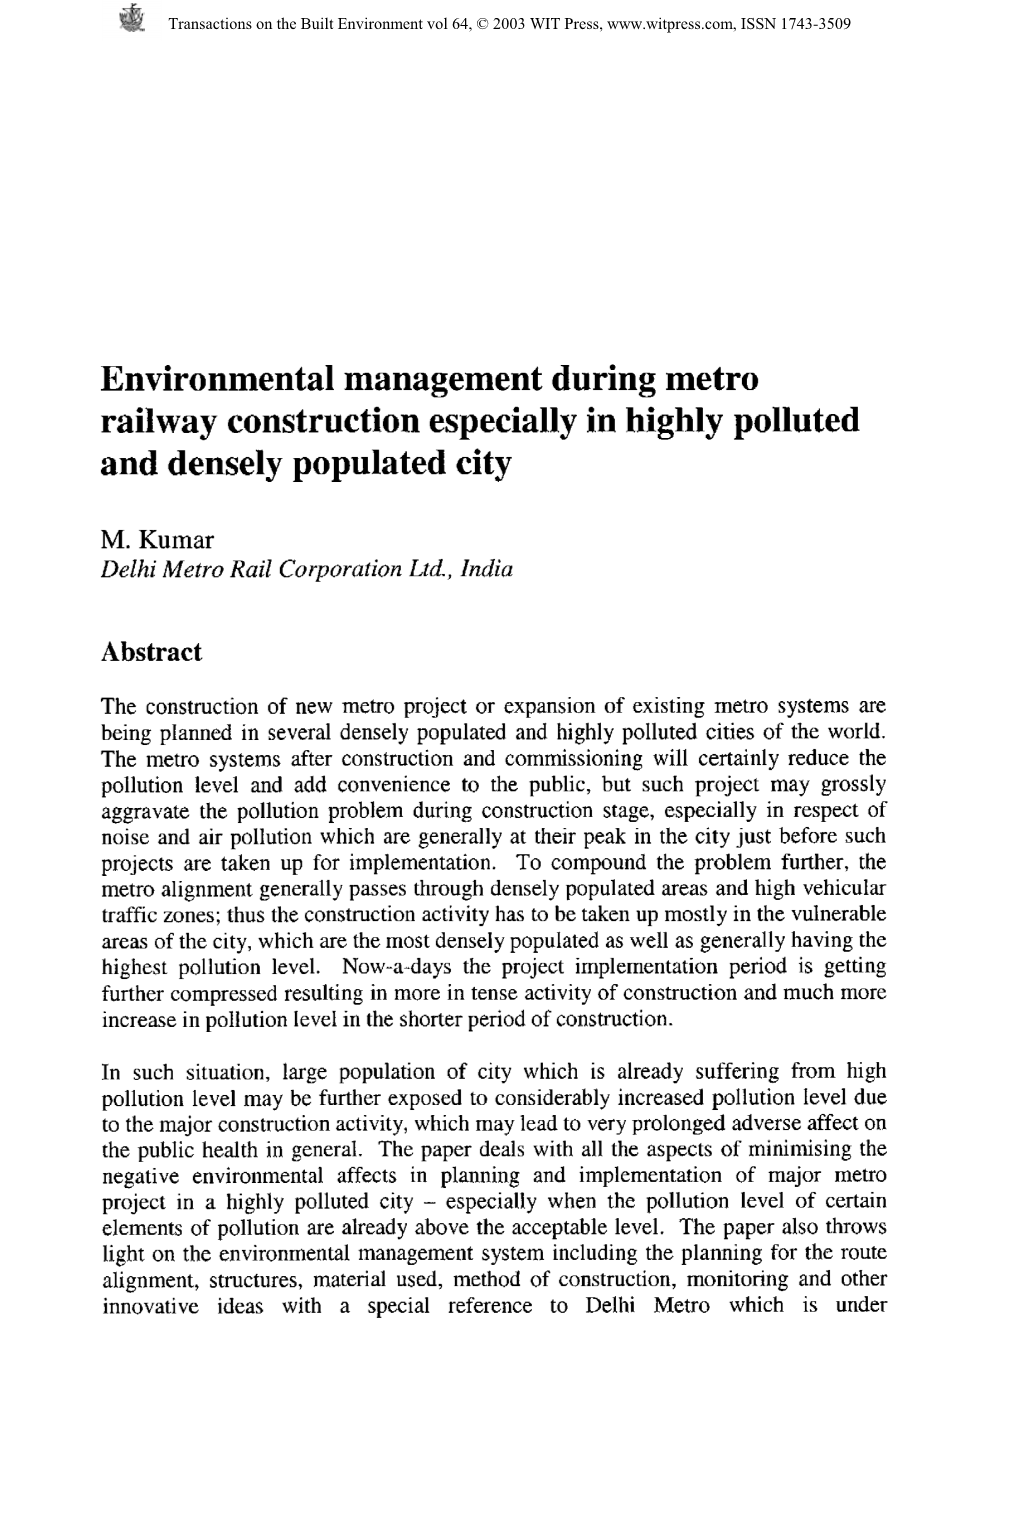 Environmental Management During Metro Railway Construction Especially in Highly Polluted and Densely Populated City